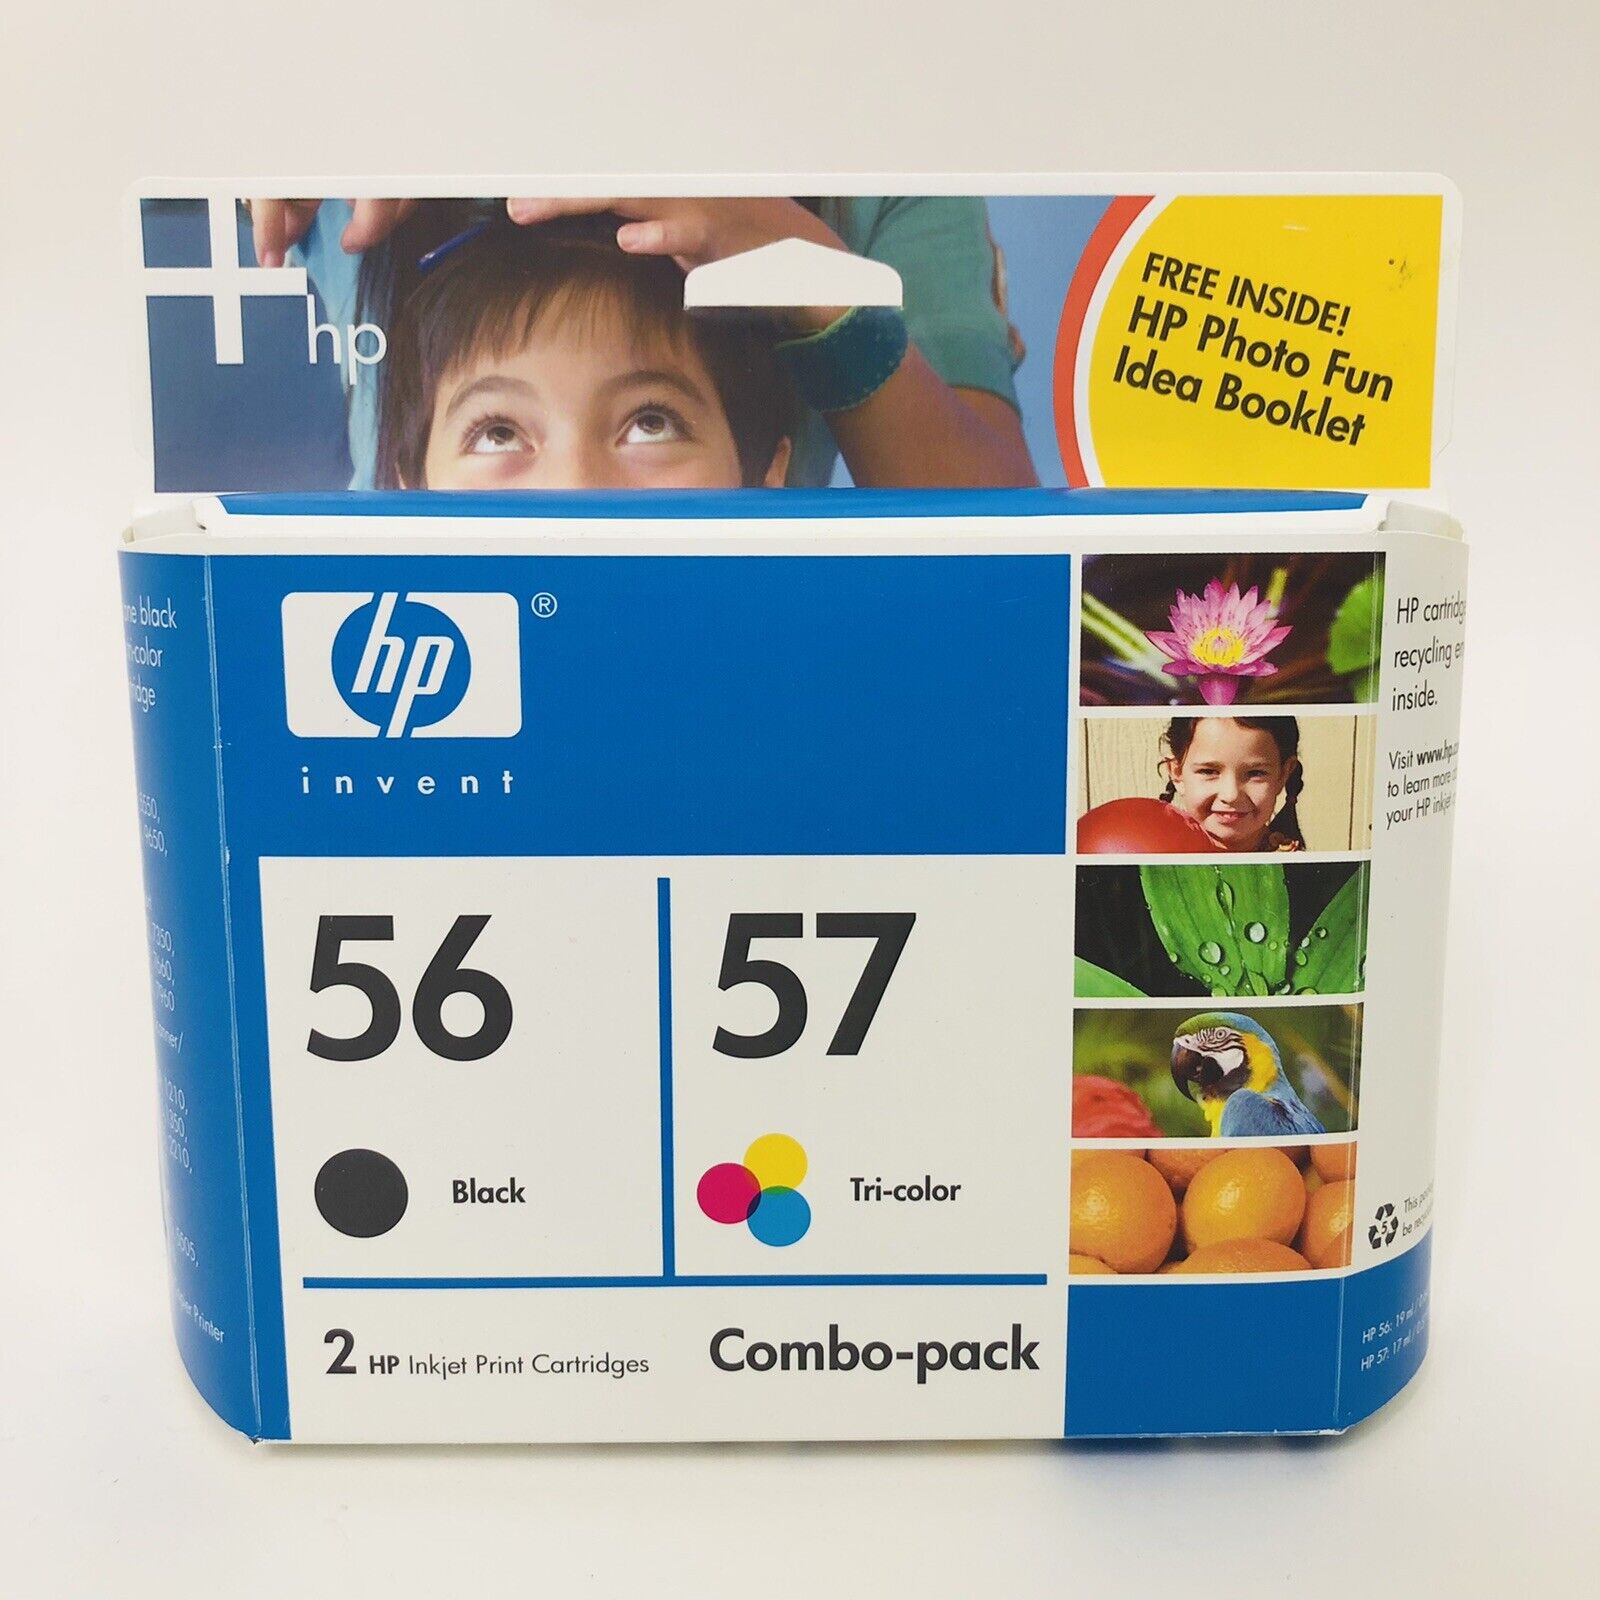 HP Invent Ink Cartridge 56 Black 57 Tri-color Inkjet Print Combo Pack Expired